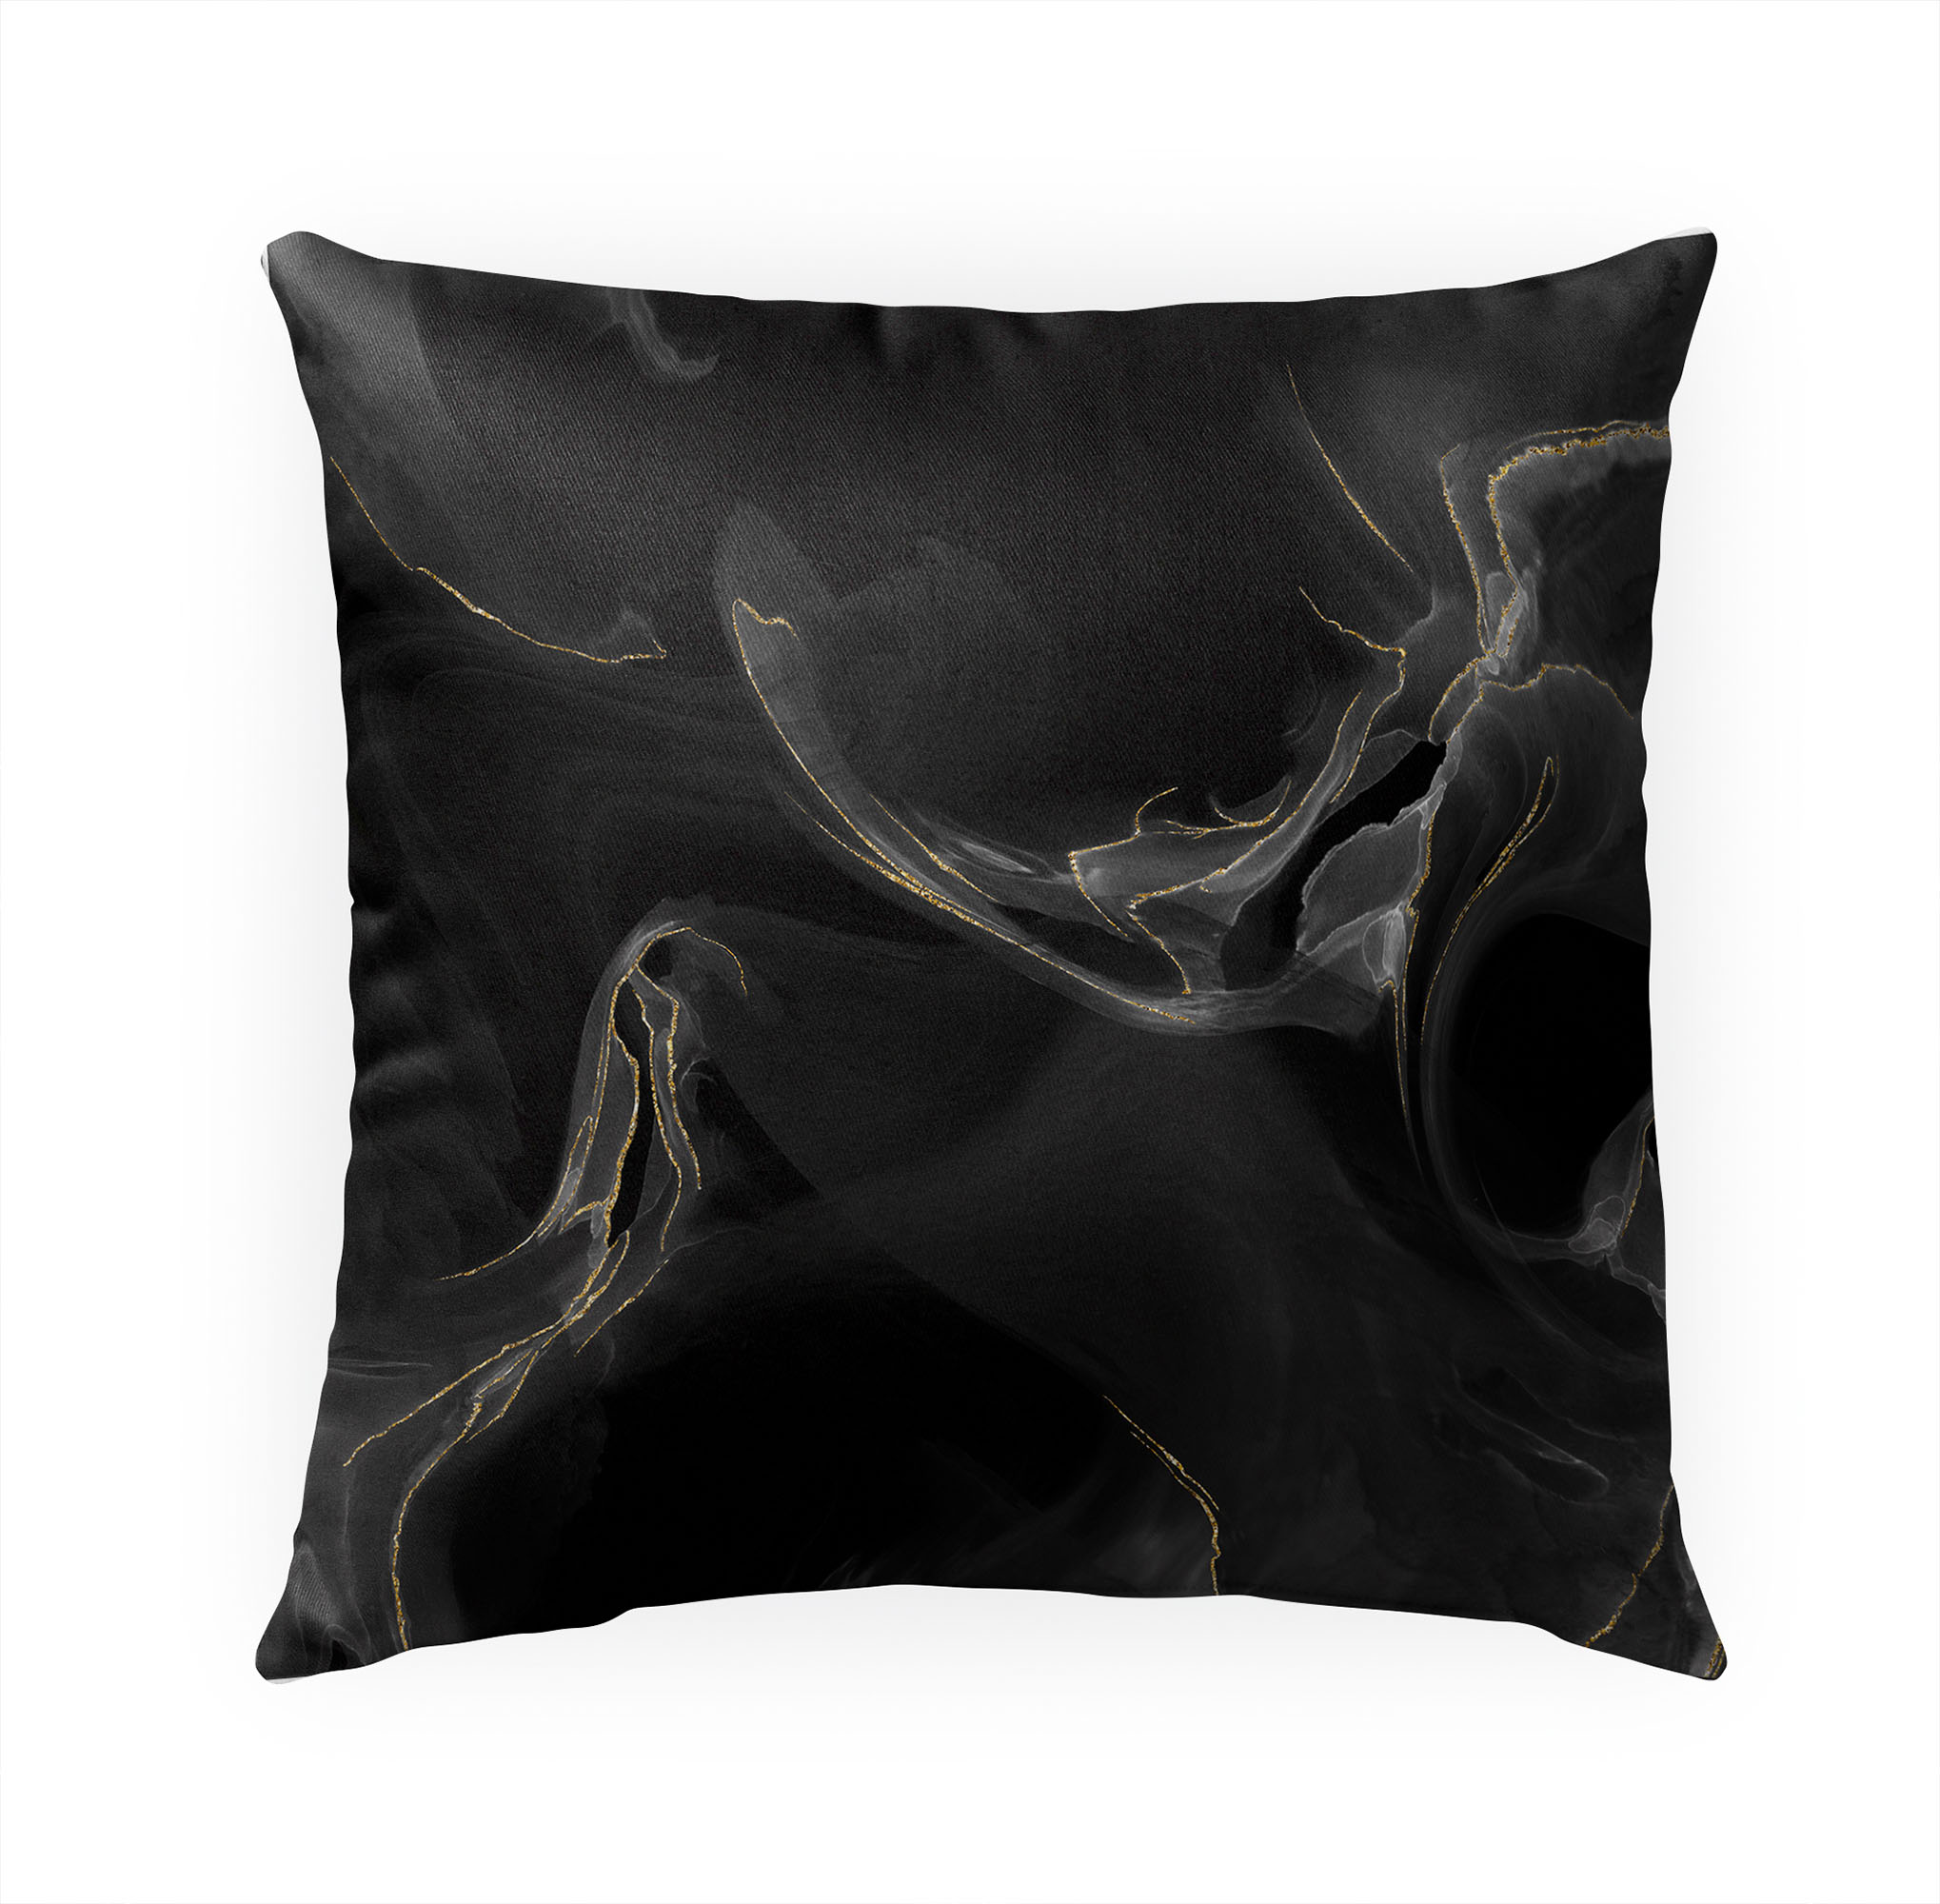 Marble Black Outdoor Pillow by Kavka Designs - image 1 of 5